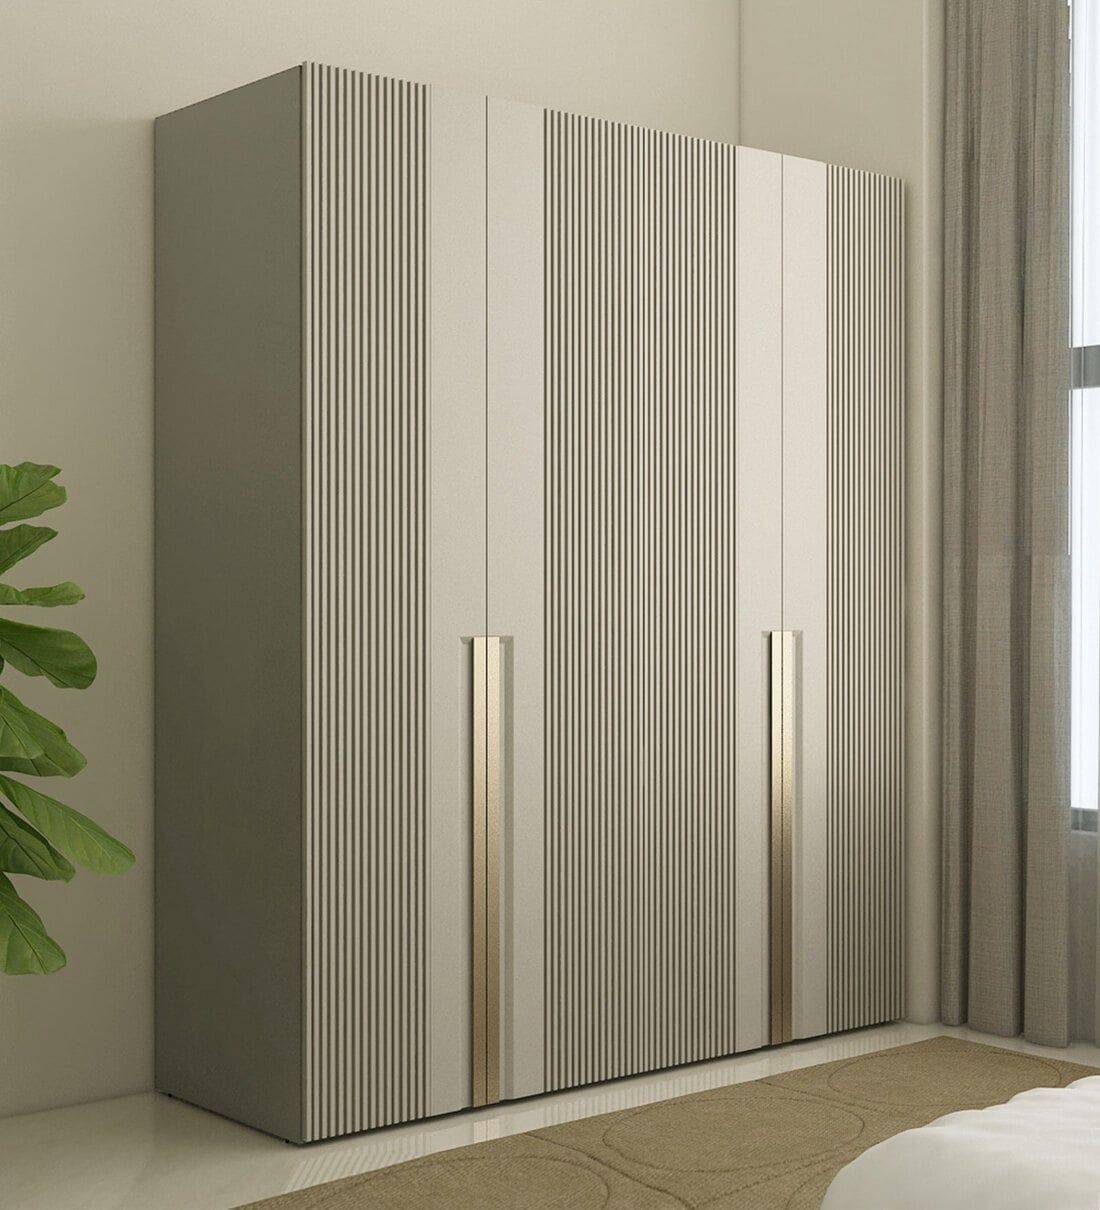 Buy Astor Modern 4 Door Wardrobe In Cashmere Colour With Stripes At 26% Off Spacewood | Pepperfry Pertaining To 4 Door Wardrobes (Photo 10 of 15)